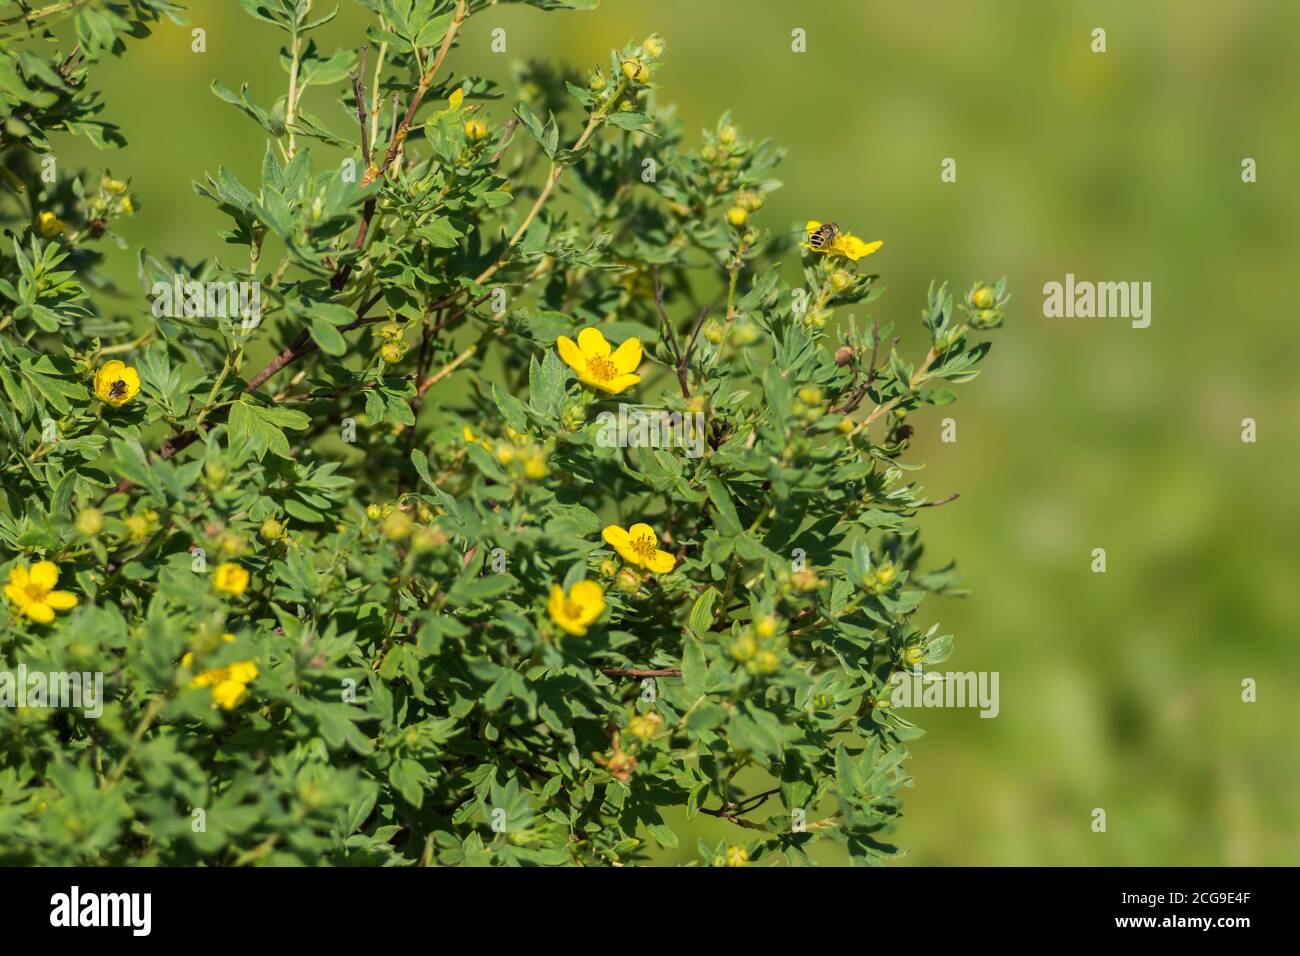 Blooming bush of a wild cinquefoil (Pentaphylloides fruticosa) on a green natural background. Stock Photo